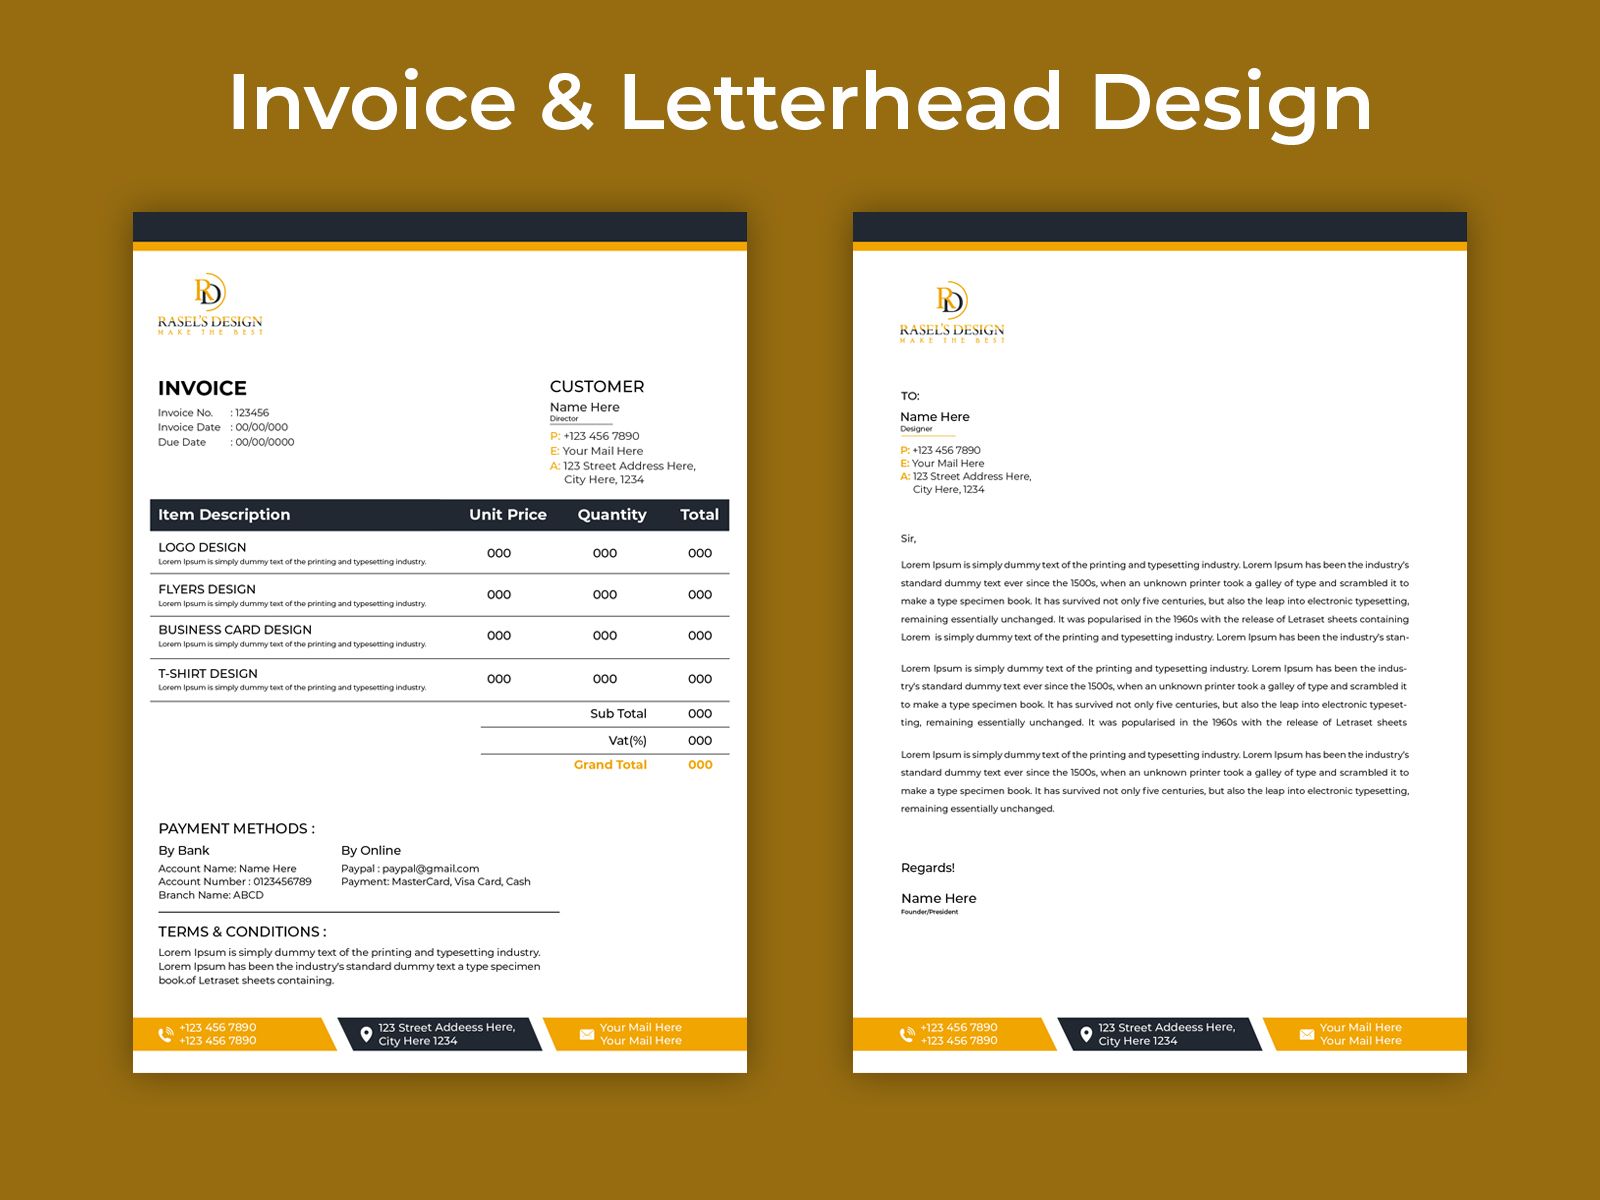 invoice-letterhead-template-by-rasel-s-design-on-dribbble